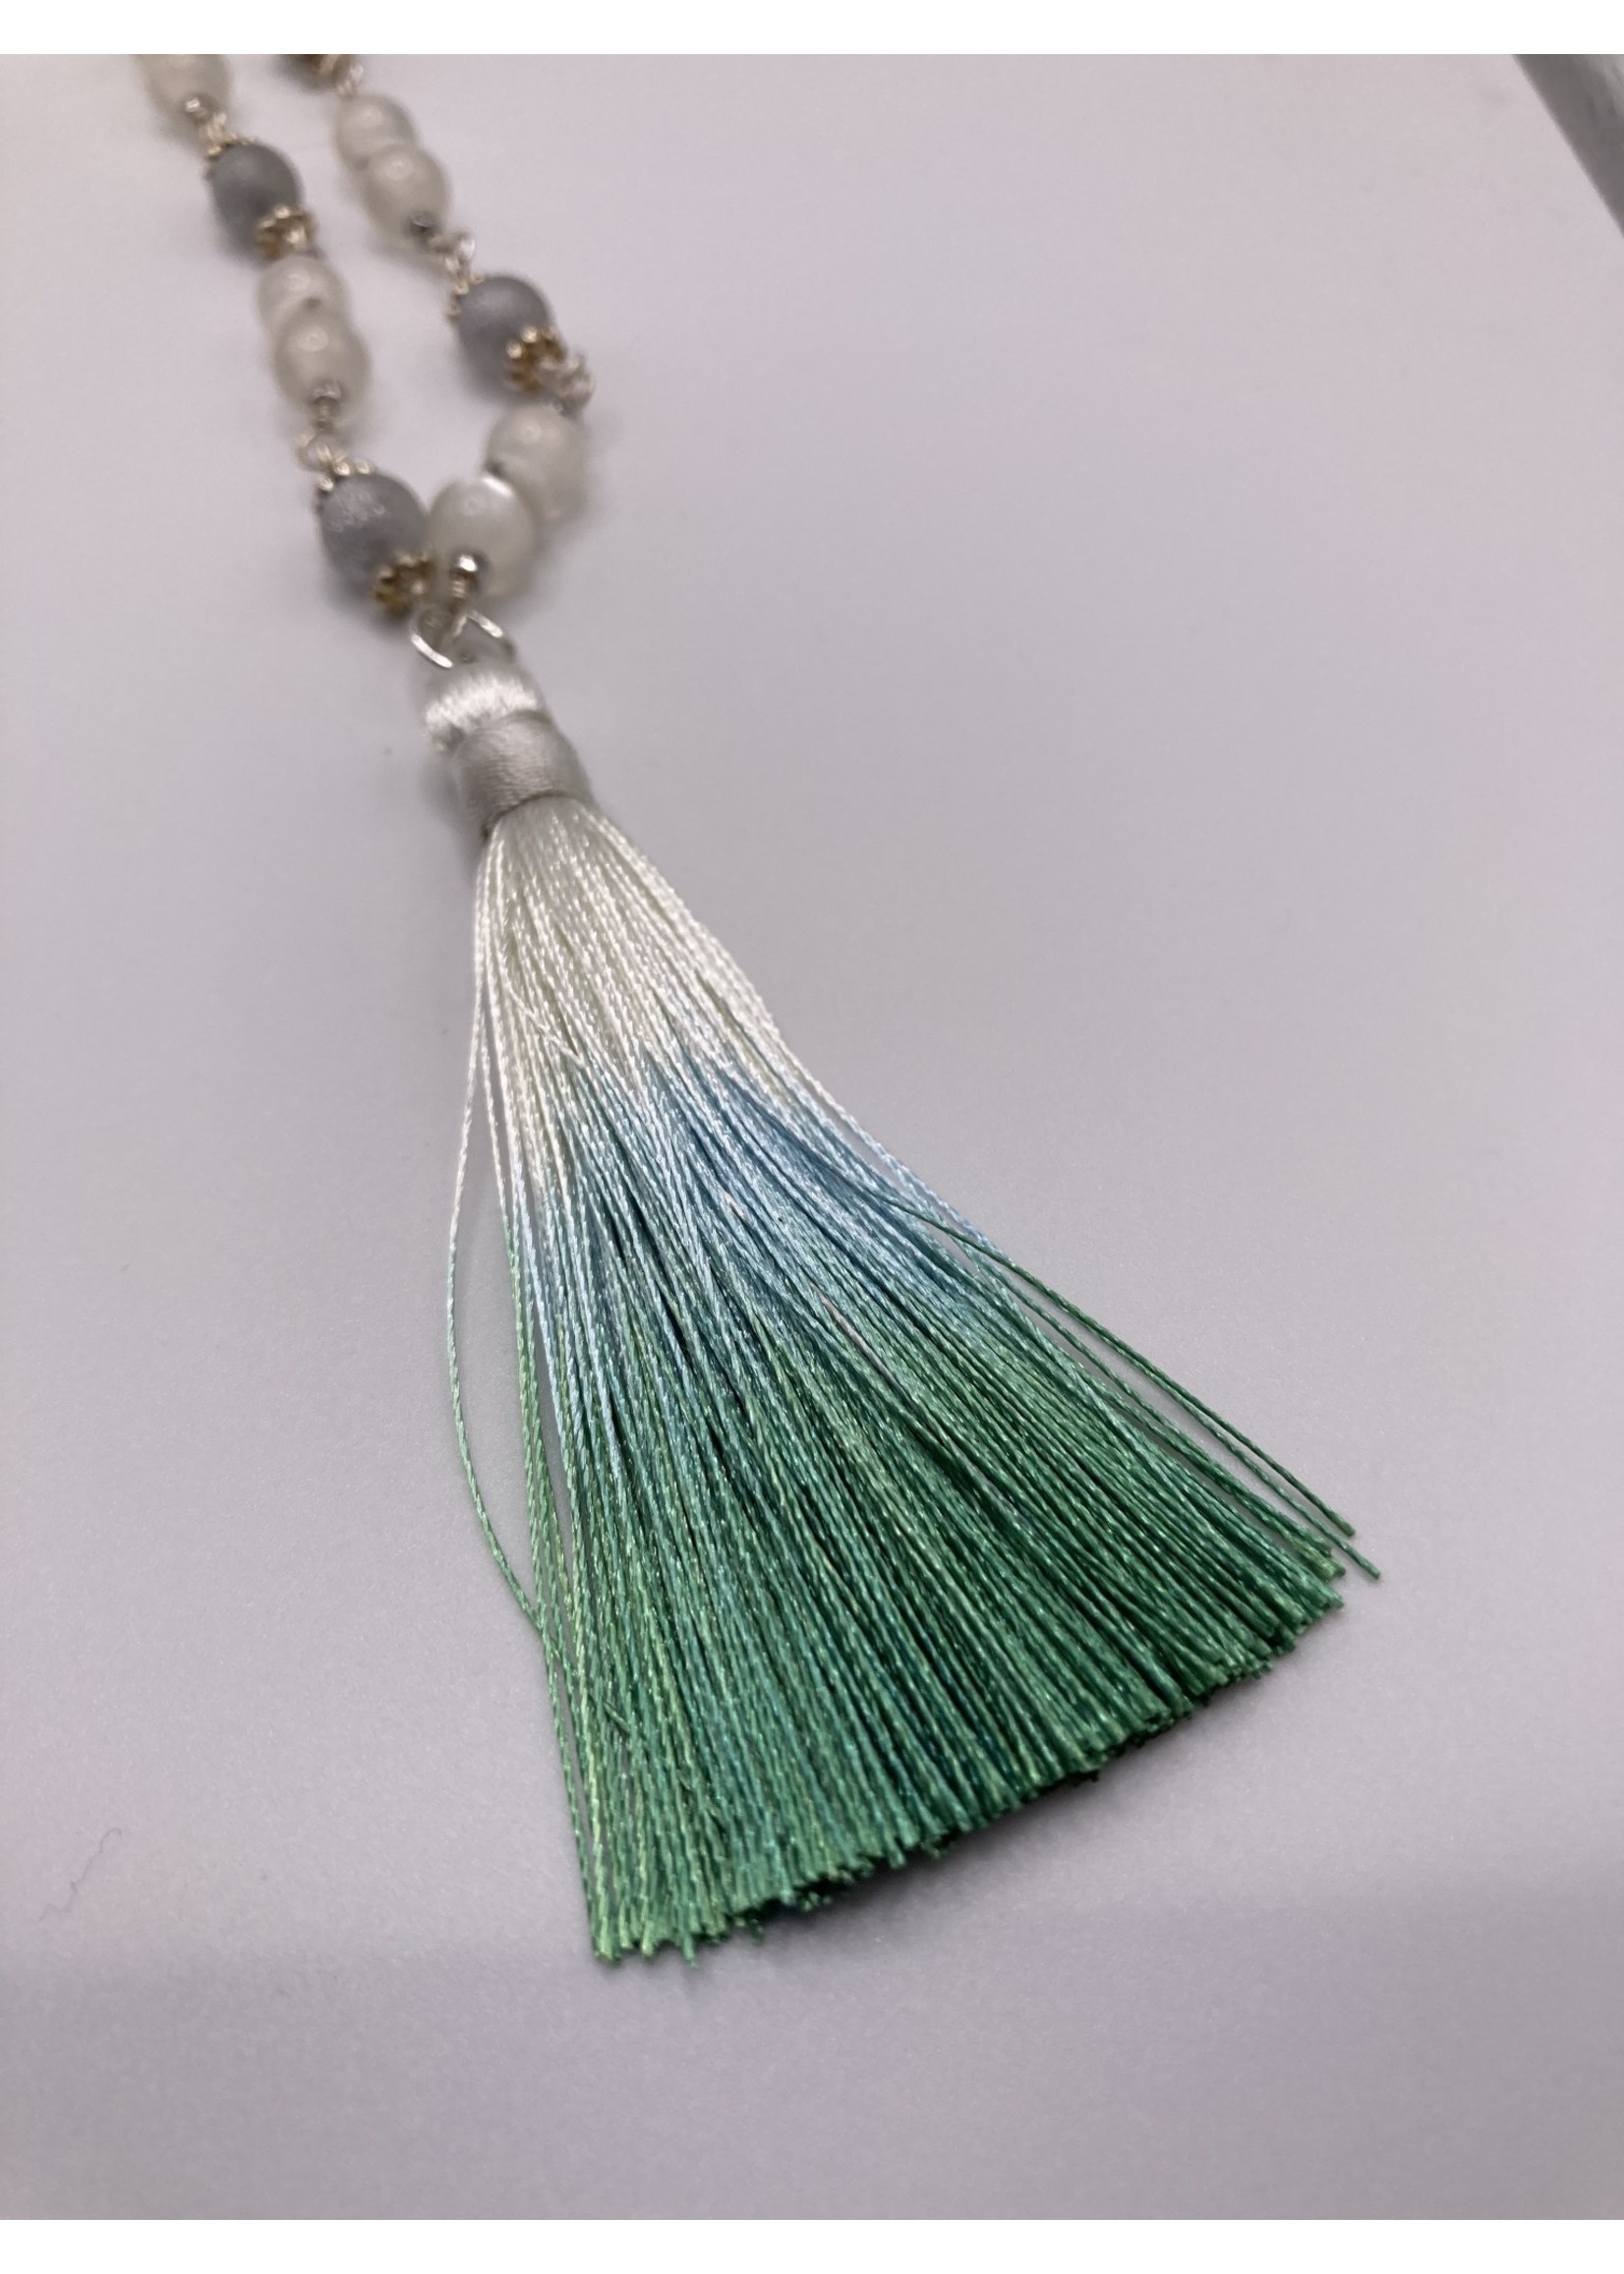 Our Twisted Dahlia N208 Milky White Cat’s Eye with Silver Findings, Heishi Beads, and Silk Tassle in White, Shades of Turquoise Necklace